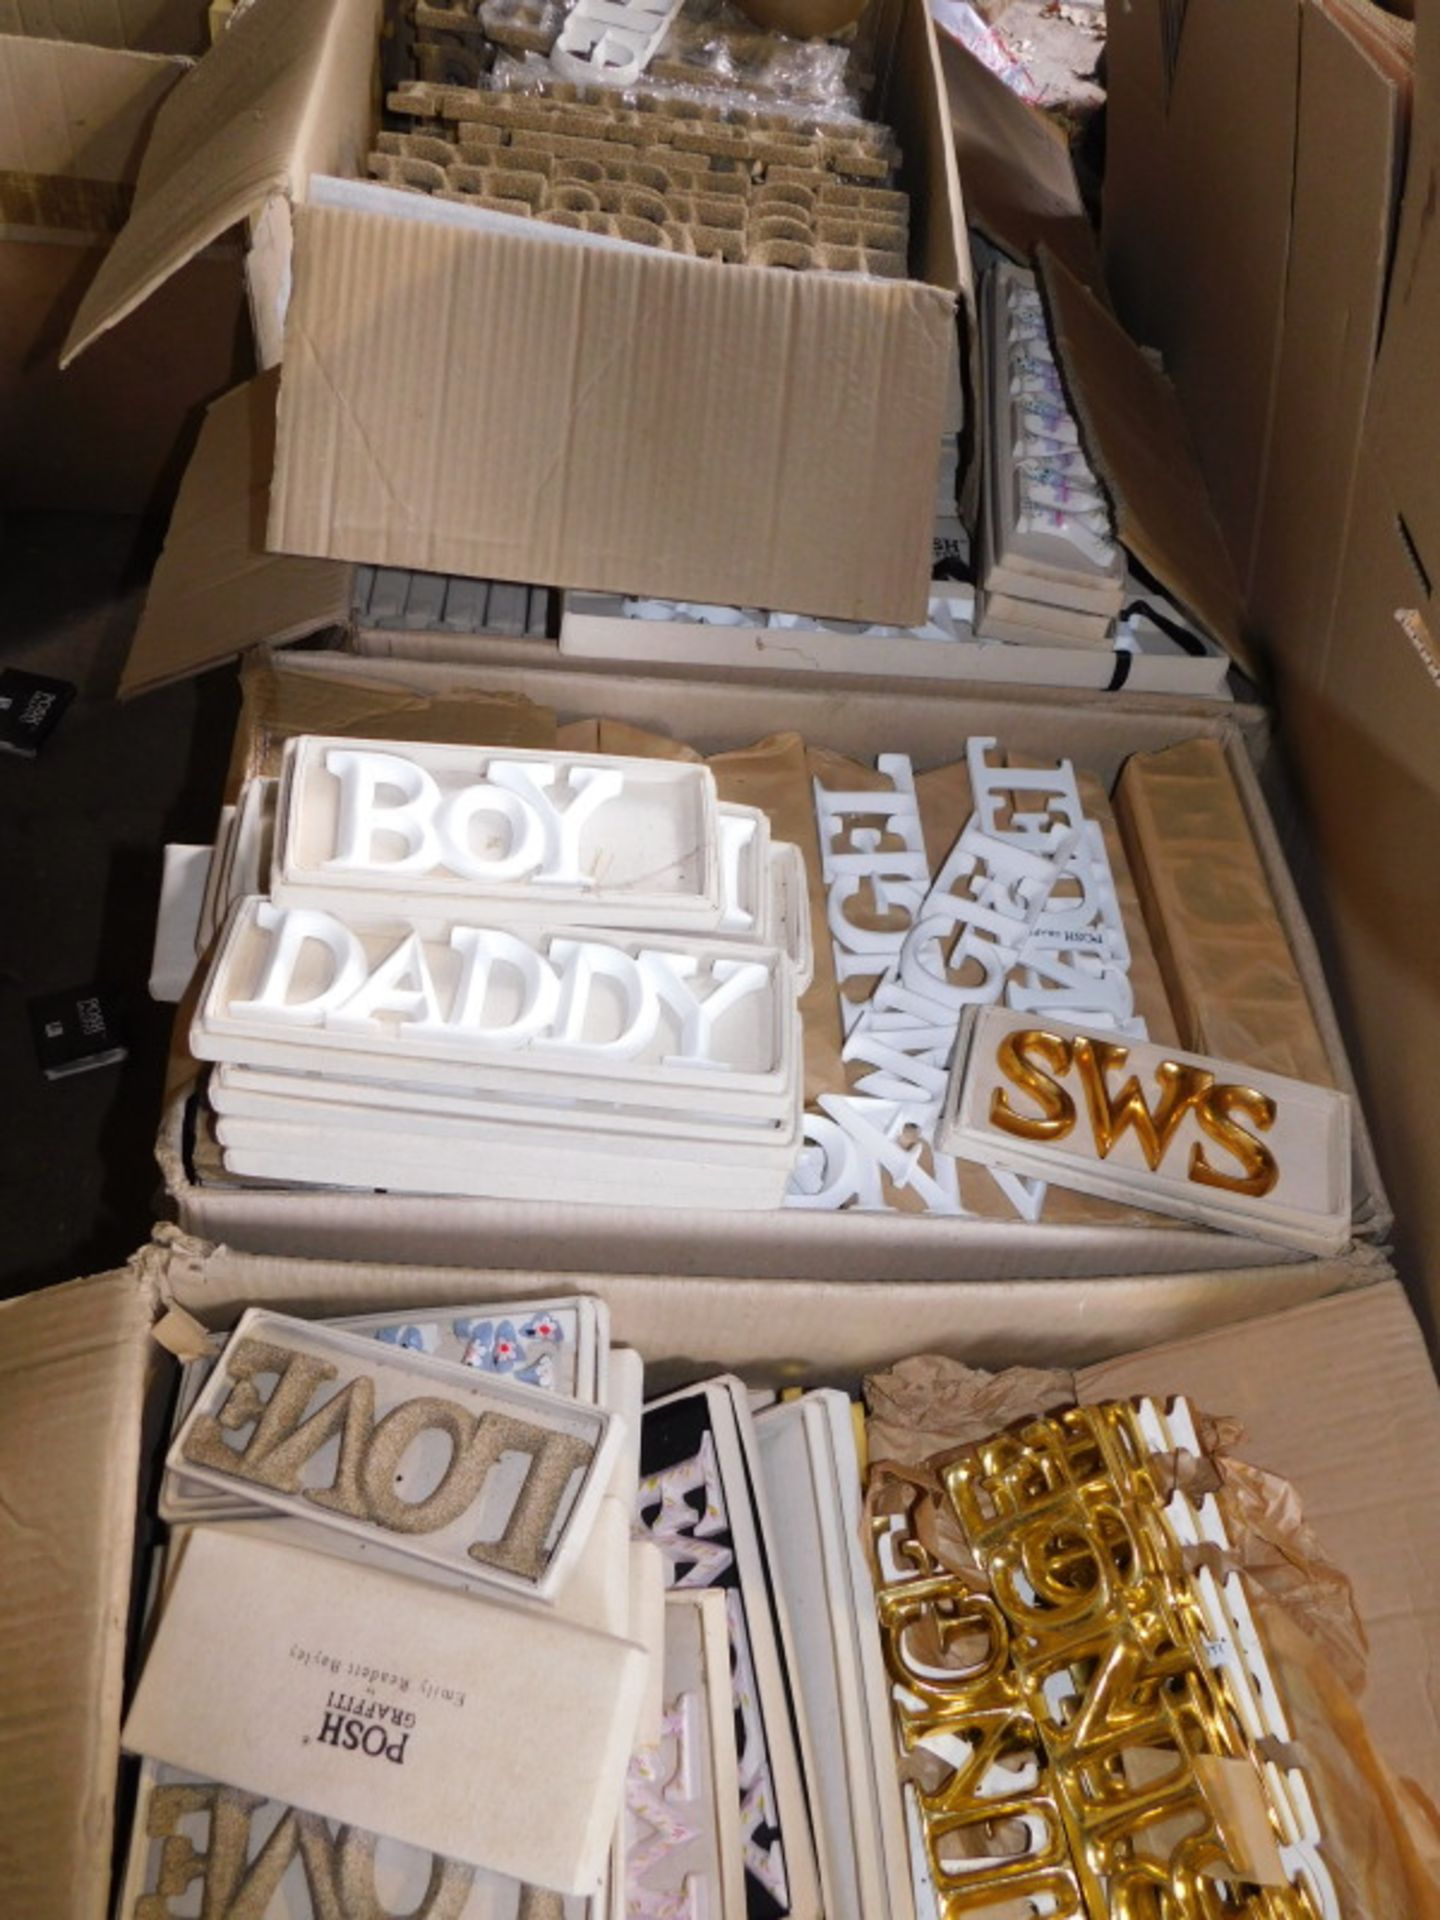 A group of painted carved wooden words, to include Boy, Daddy, Angel, Prince, Girl, etc., in gold, w